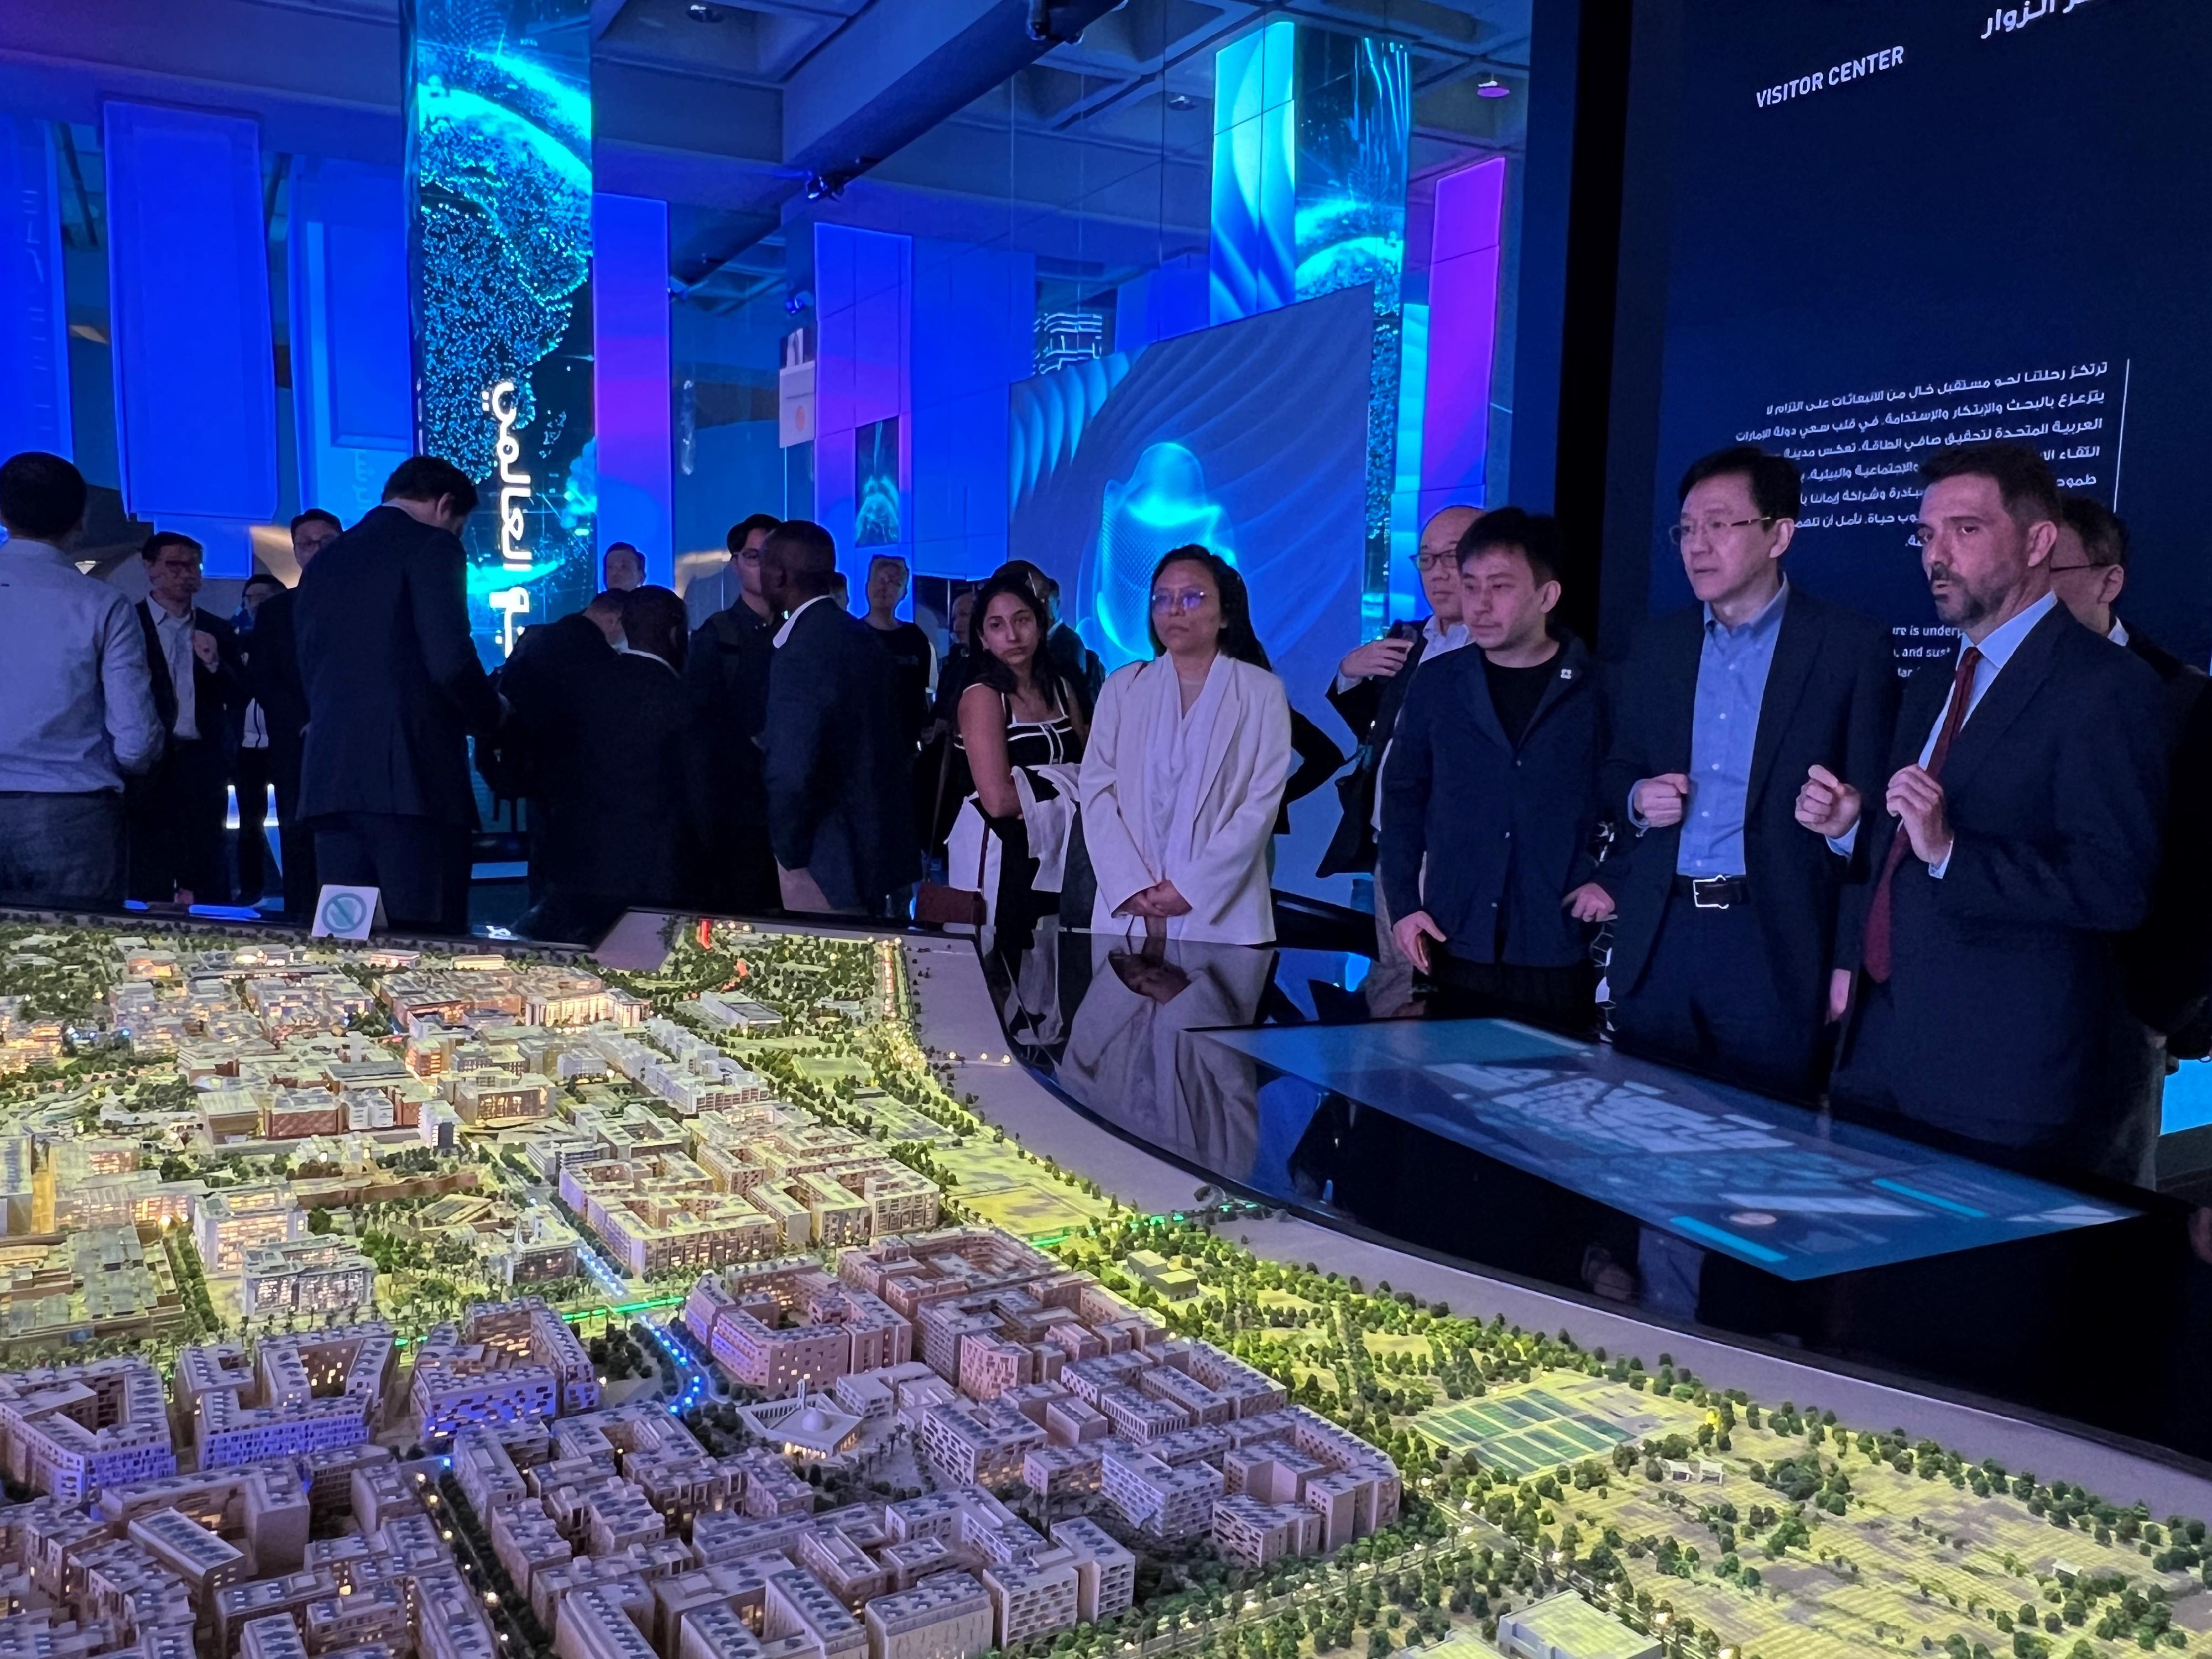 The Secretary for Innovation, Technology and Industry, Professor Sun Dong (second right), visited Masdar City on March 7 (Abu Dhabi time) and was briefed on the innovative design and technology projects of this sustainable urban community.